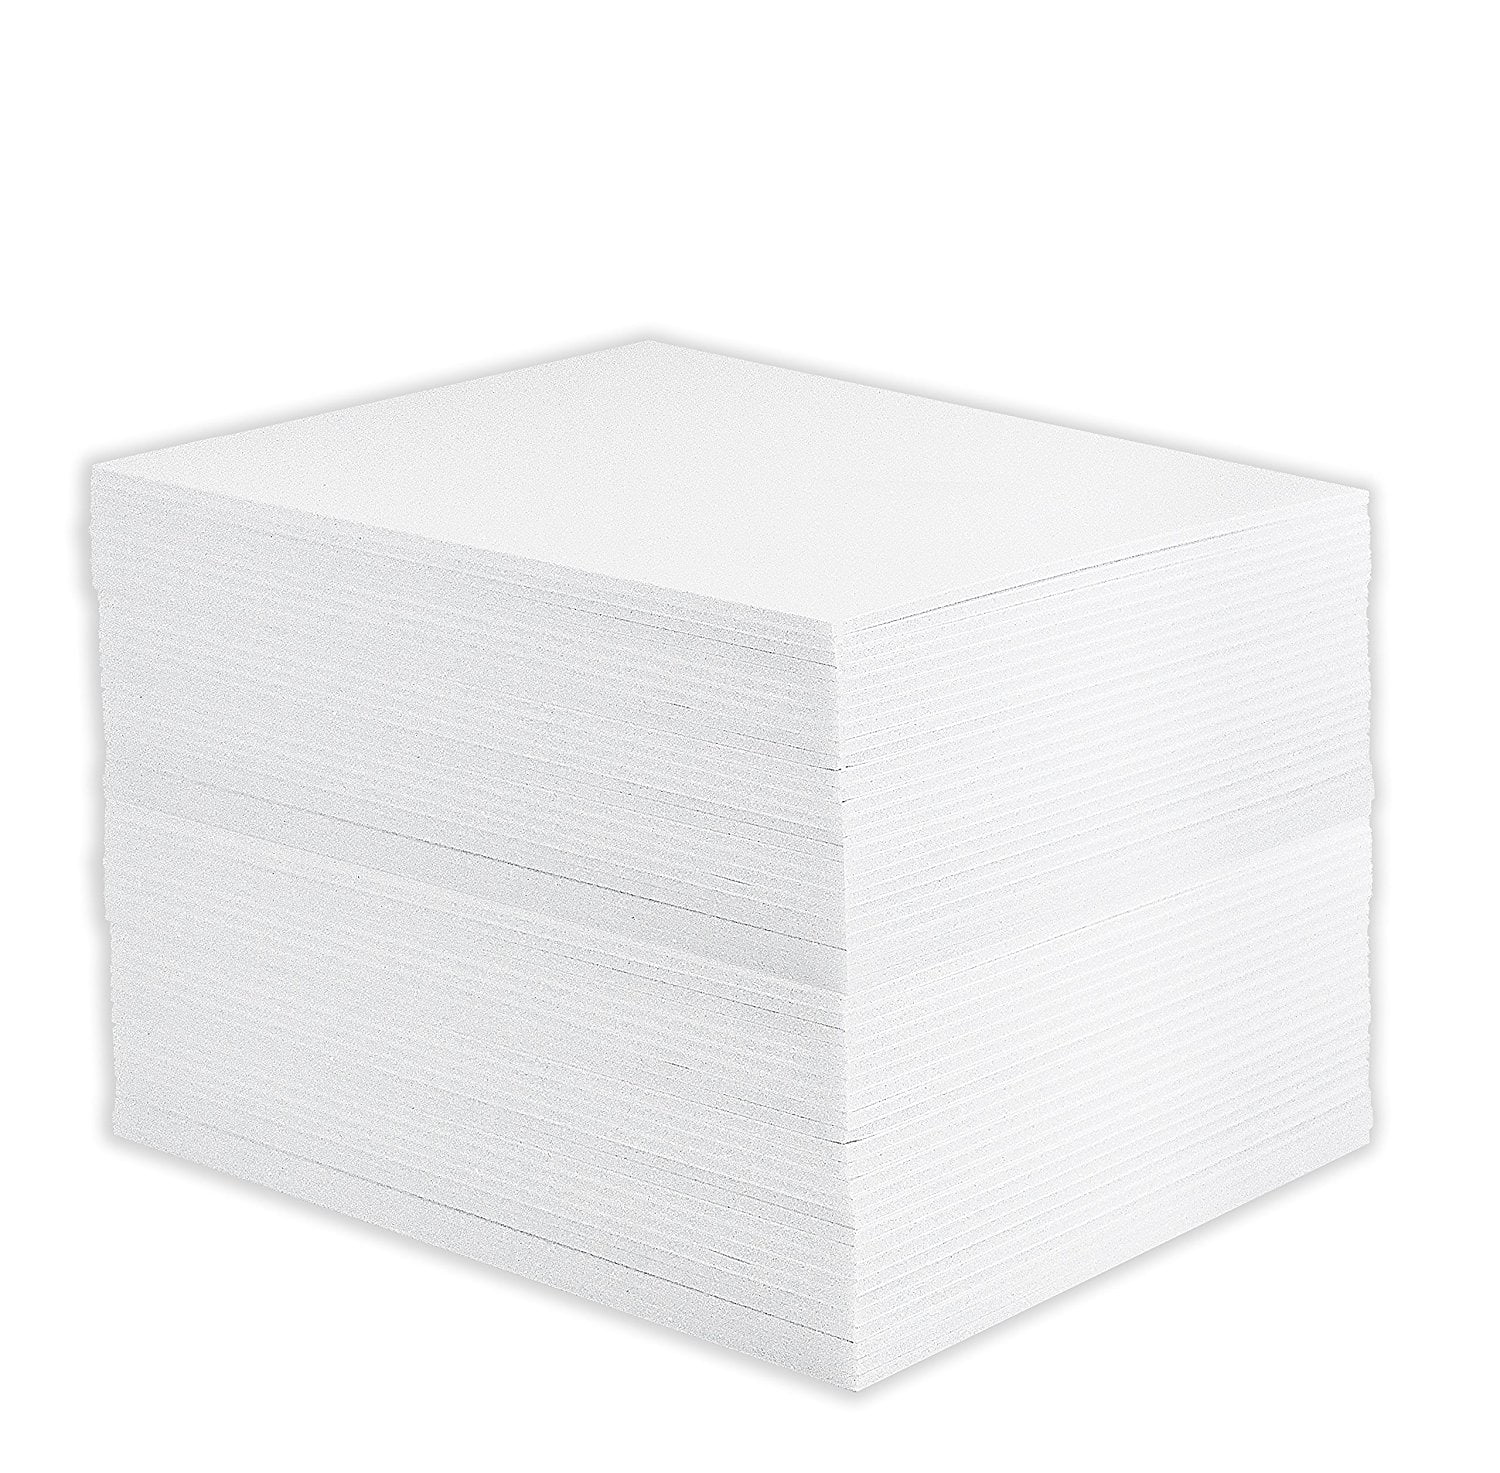 Pack of 10 1/8 White Foam Core Backing Boards 11x14, White Mat Board Center 